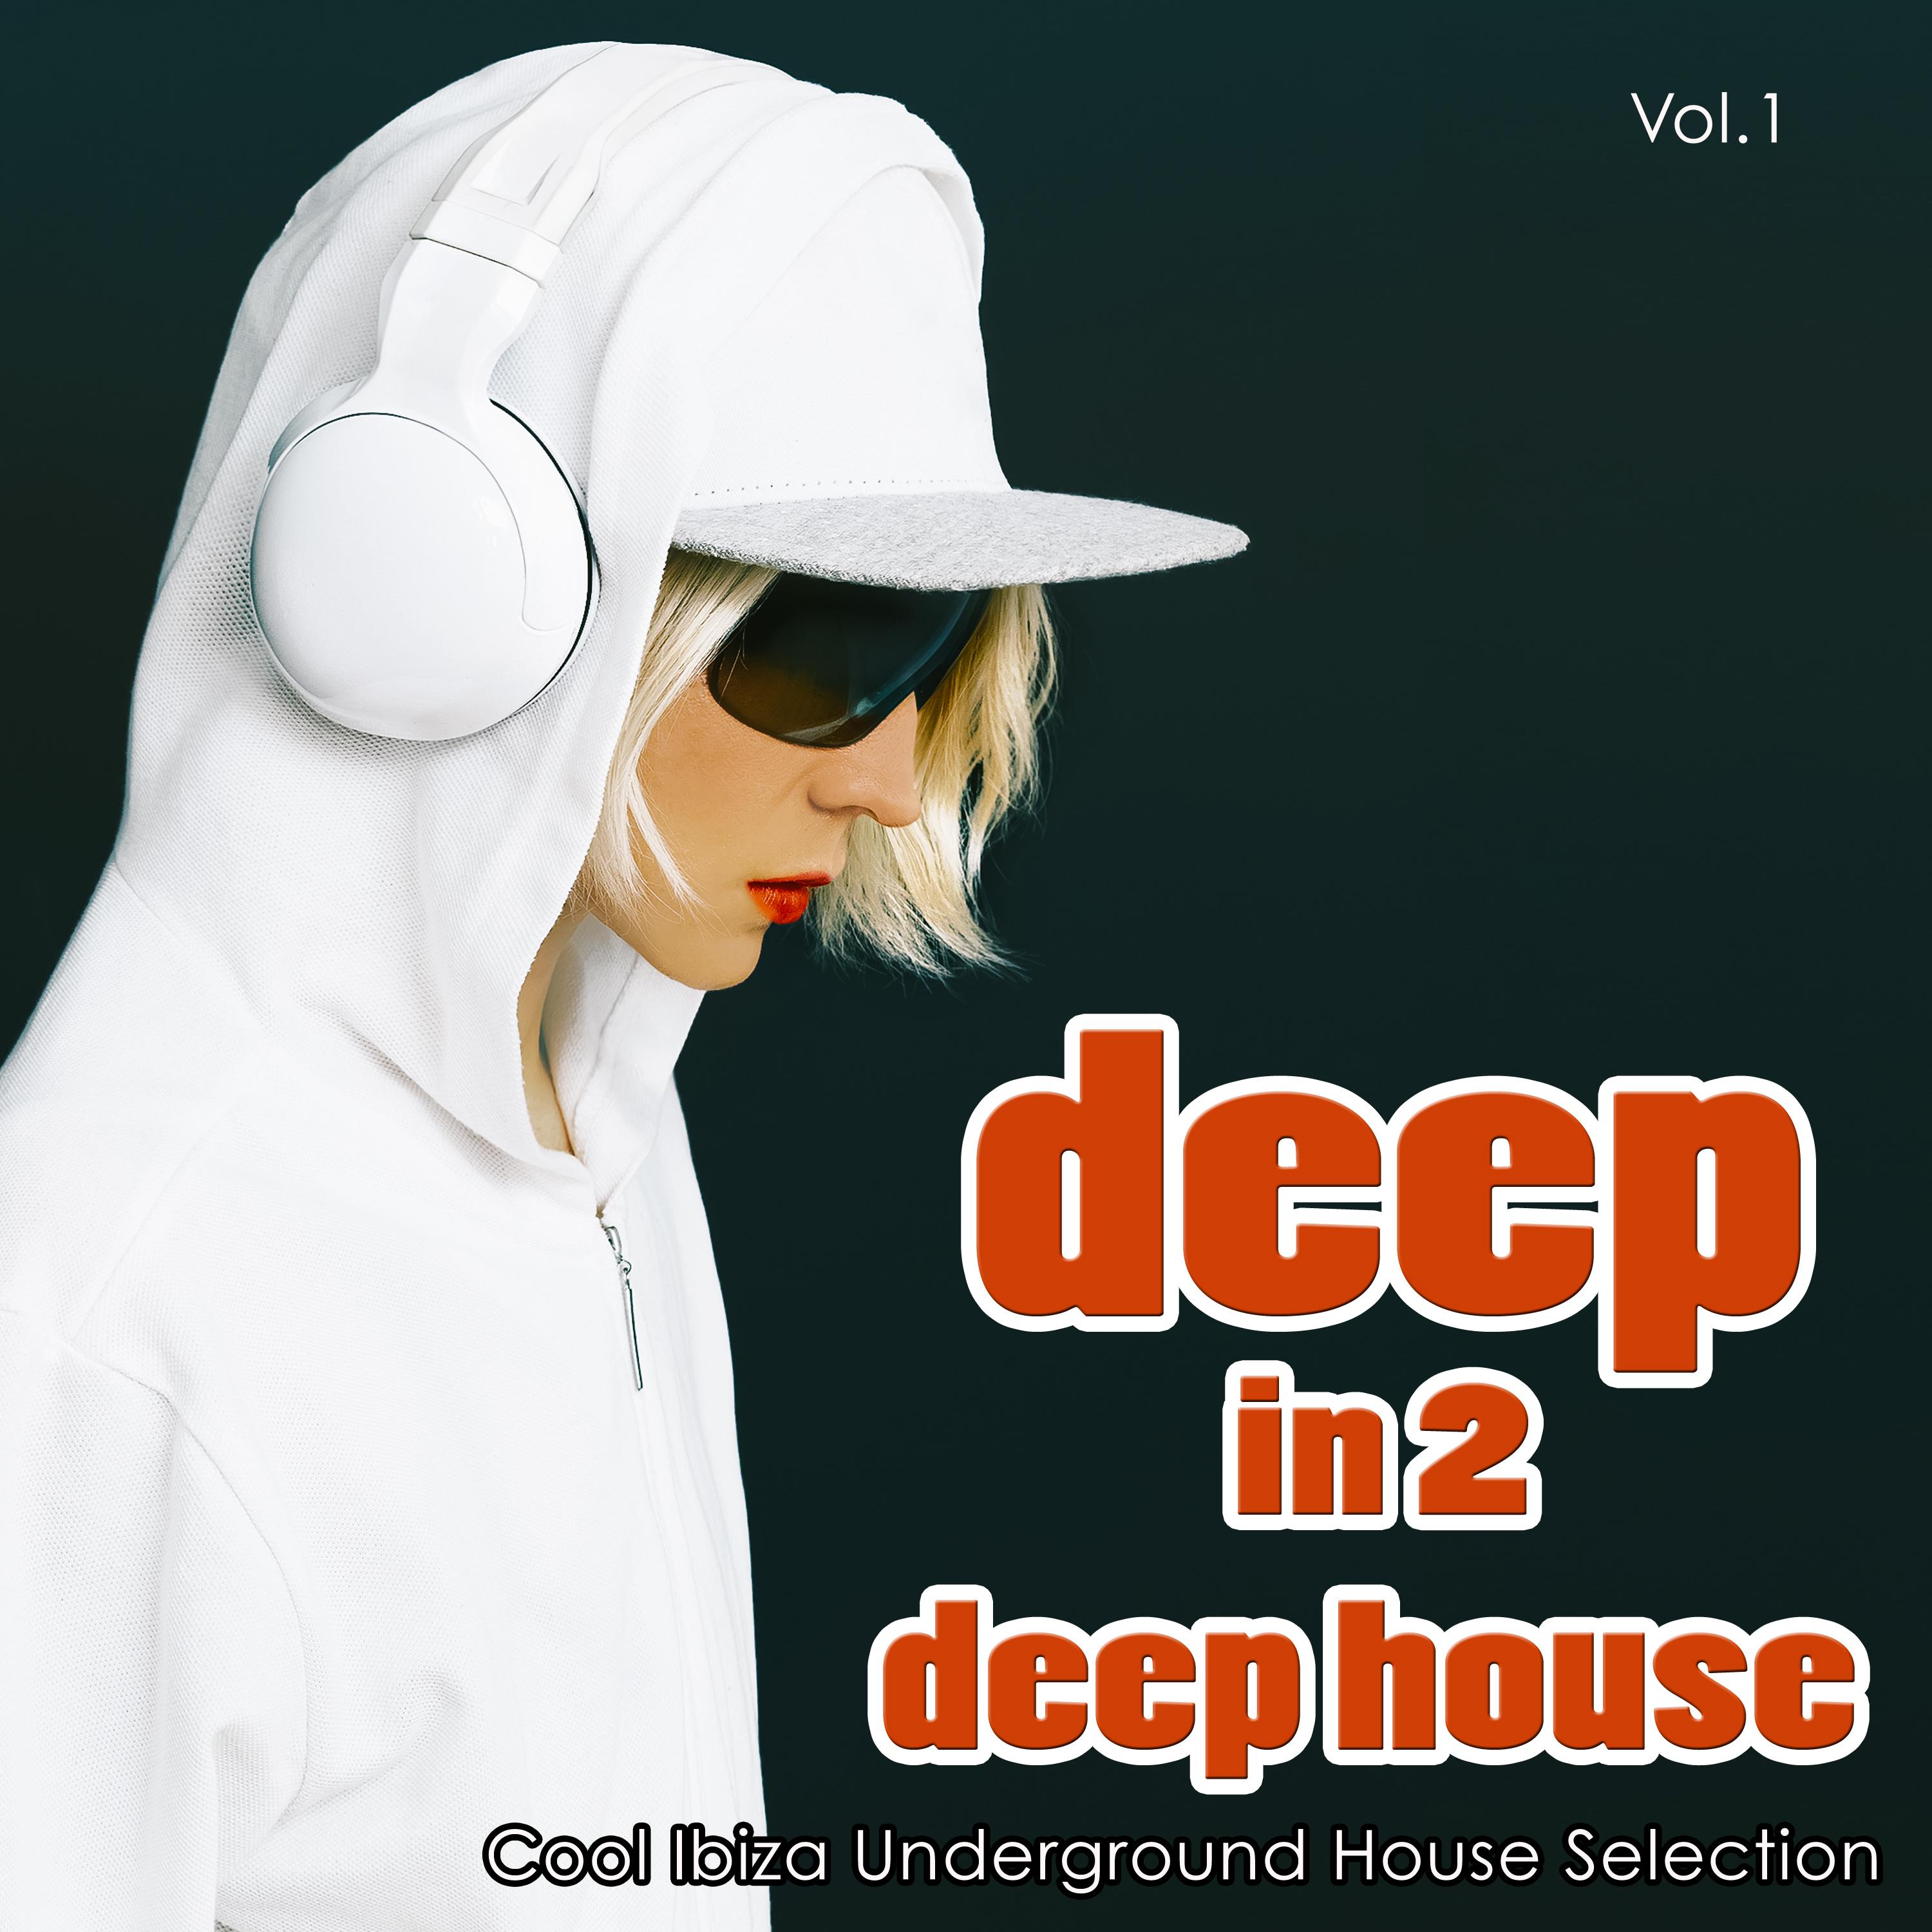 Deep in 2 Deep House, Vol. 1 - Cool Ibiza Underground House Selection